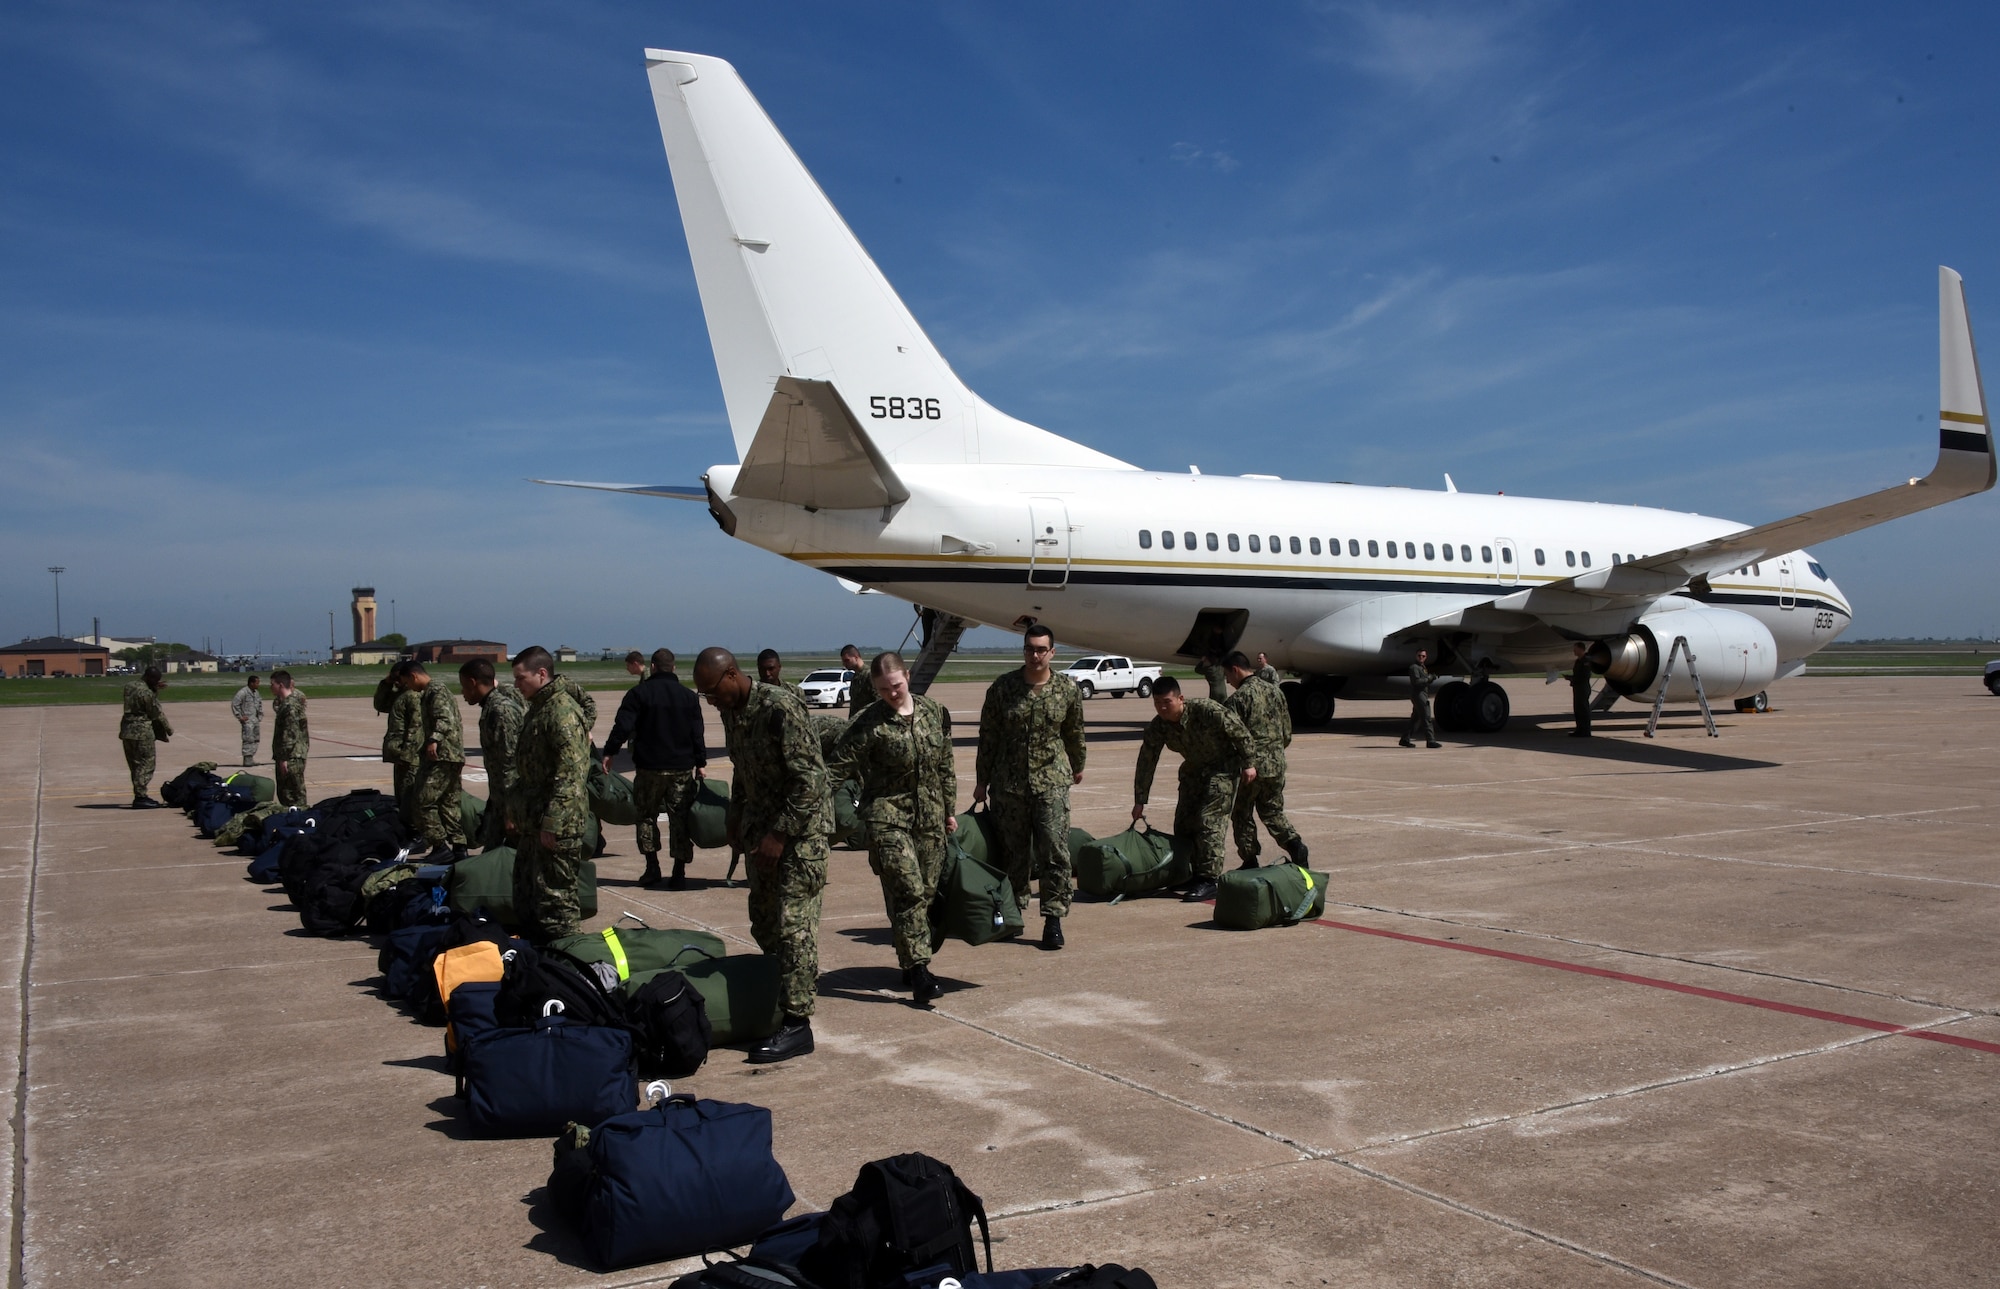 Sailors unload from an airplane to Sheppard Air Force Base, Texas, March 27, 2020. The sailors arrived from boot camp to continue their technical training at Sheppard. To help mitigate exposure to COVID-19 they were air lifted instead of the usual bus drive. (U.S. Air Force photo by Senior Airman Pedro Tenorio